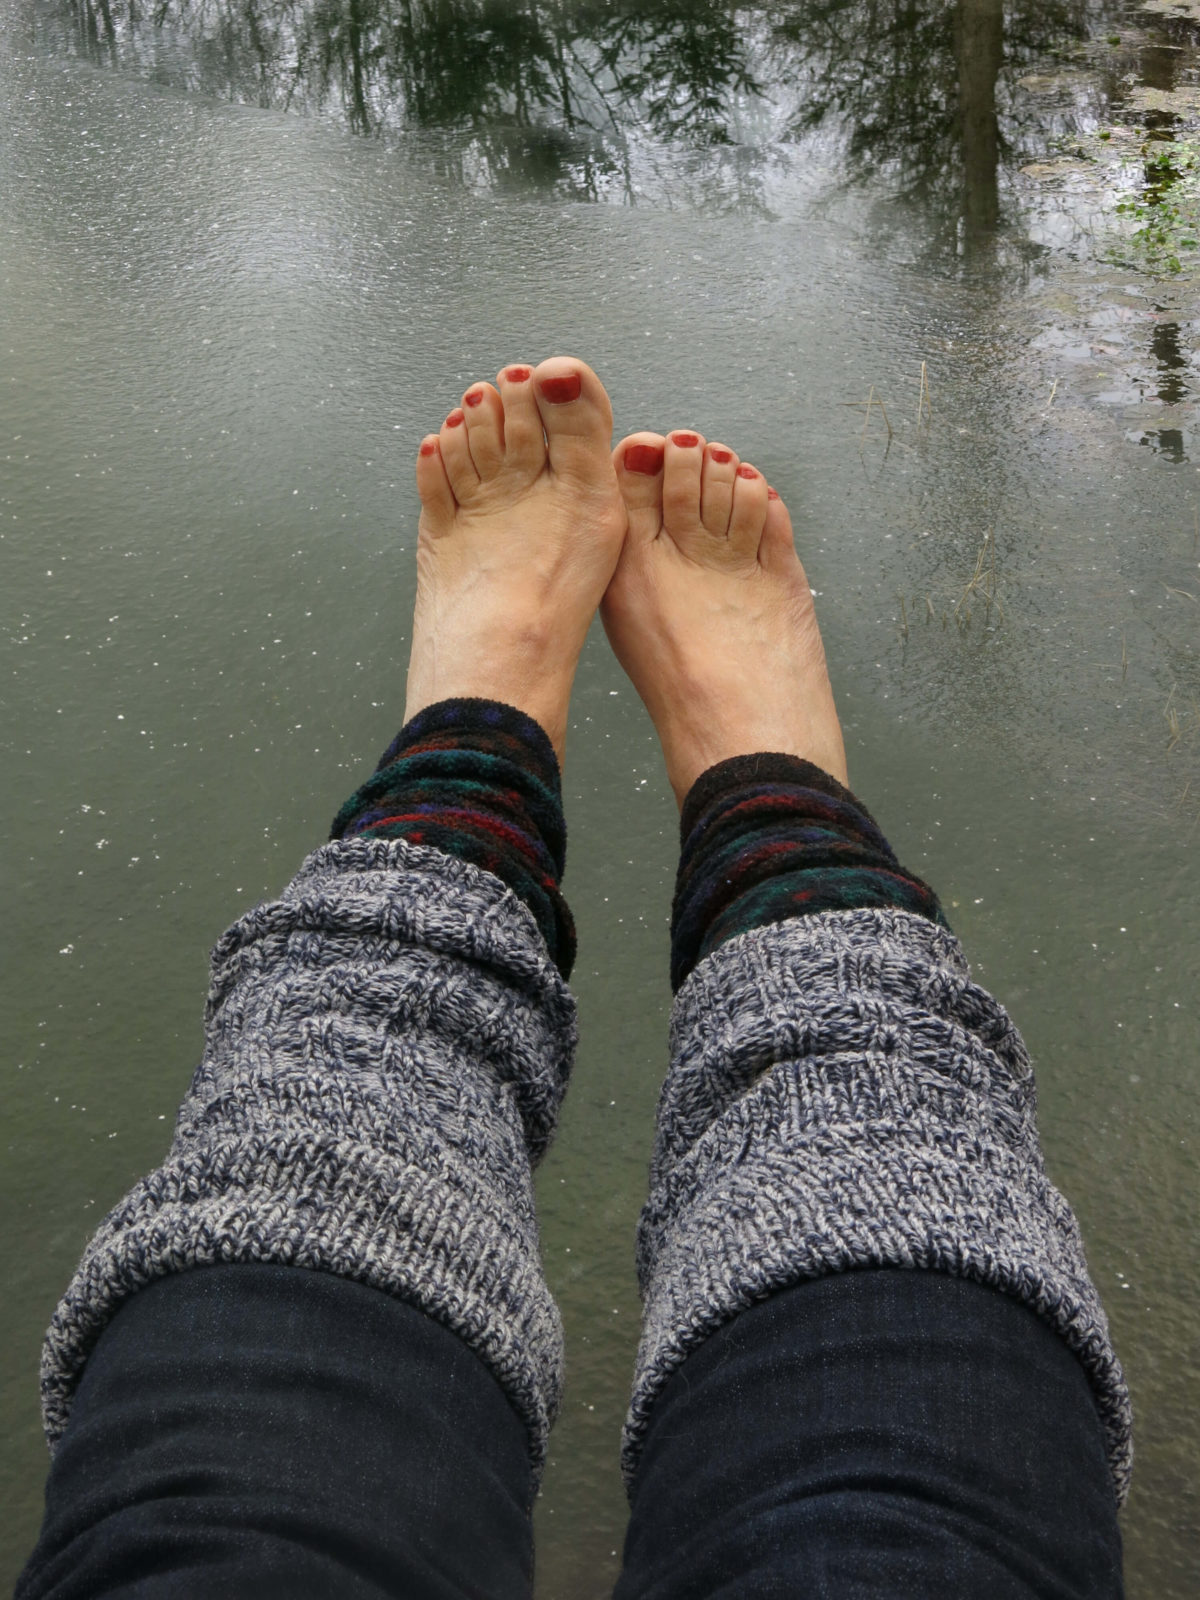 In Ithaca, New York, Robin Botie swings her red-painted toes out over the pond